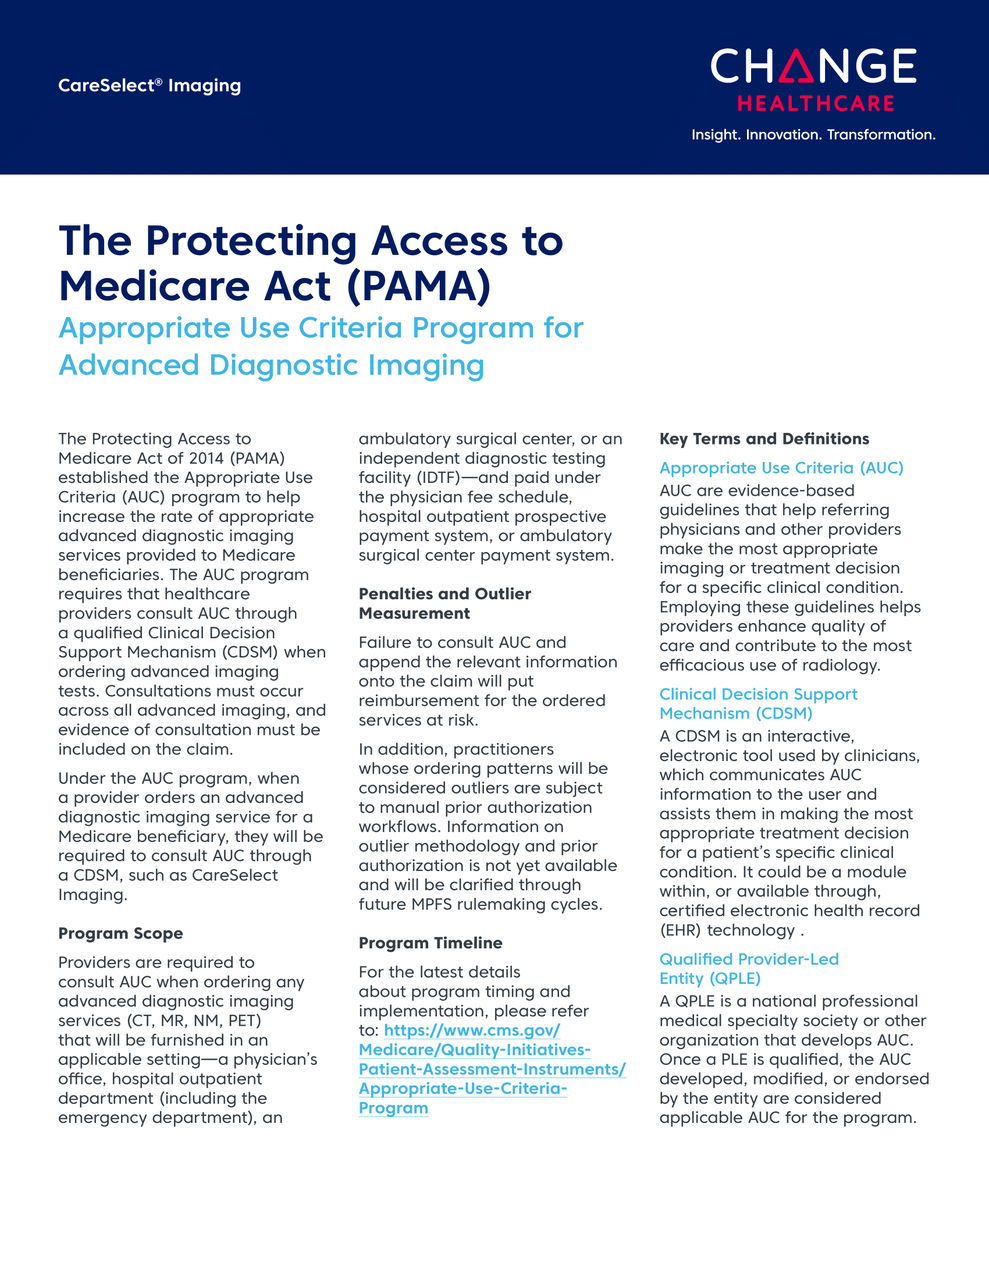 Protecting Access to Medicare